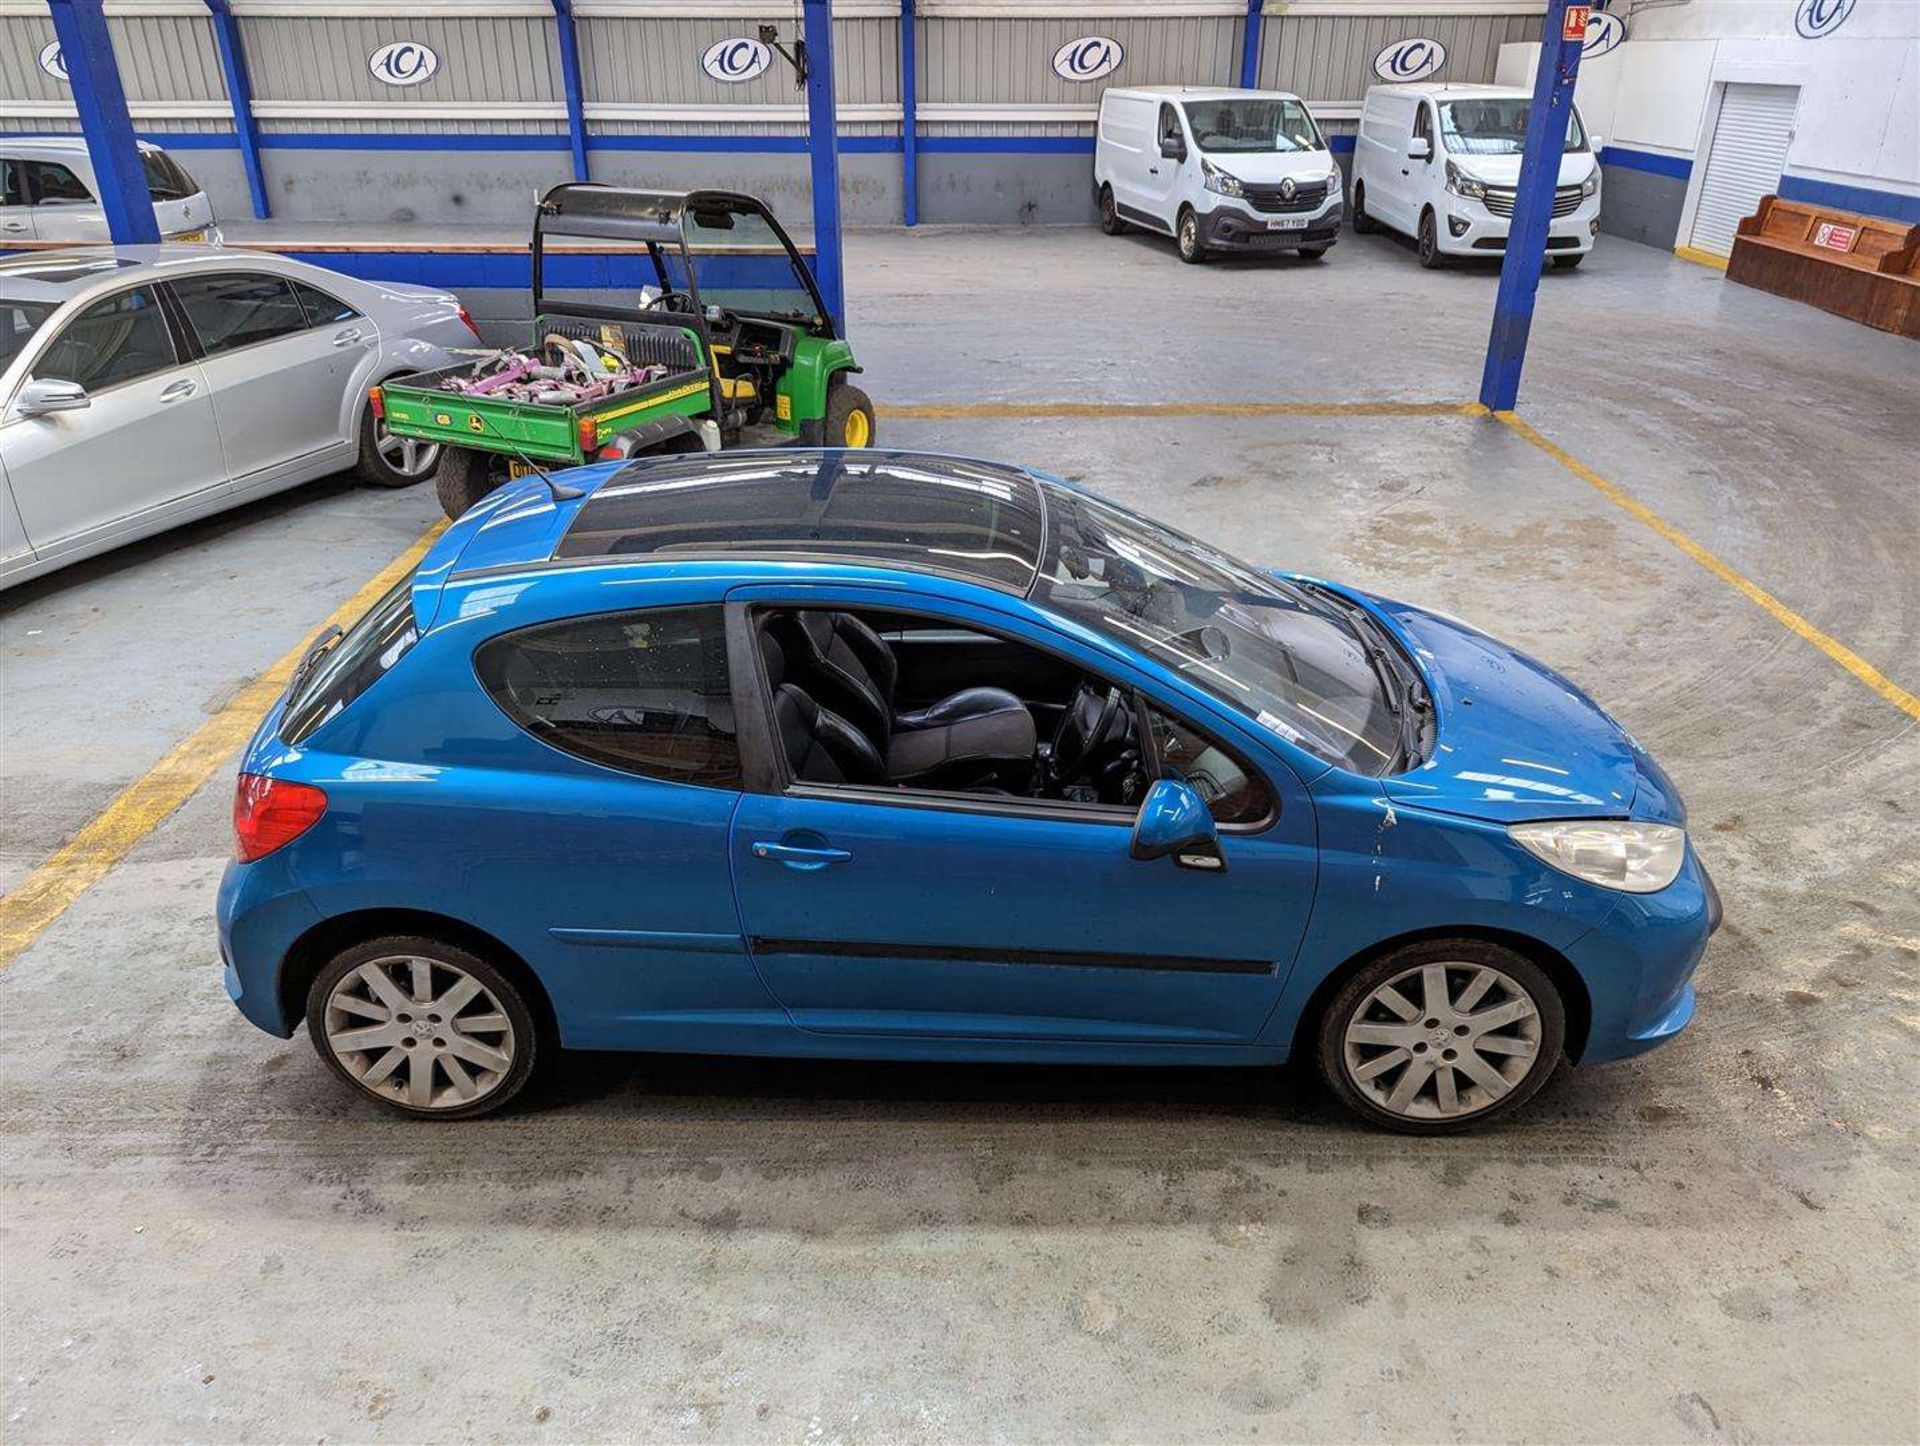 2007 PEUGEOT 207 GT HDI 110 - Image 12 of 30